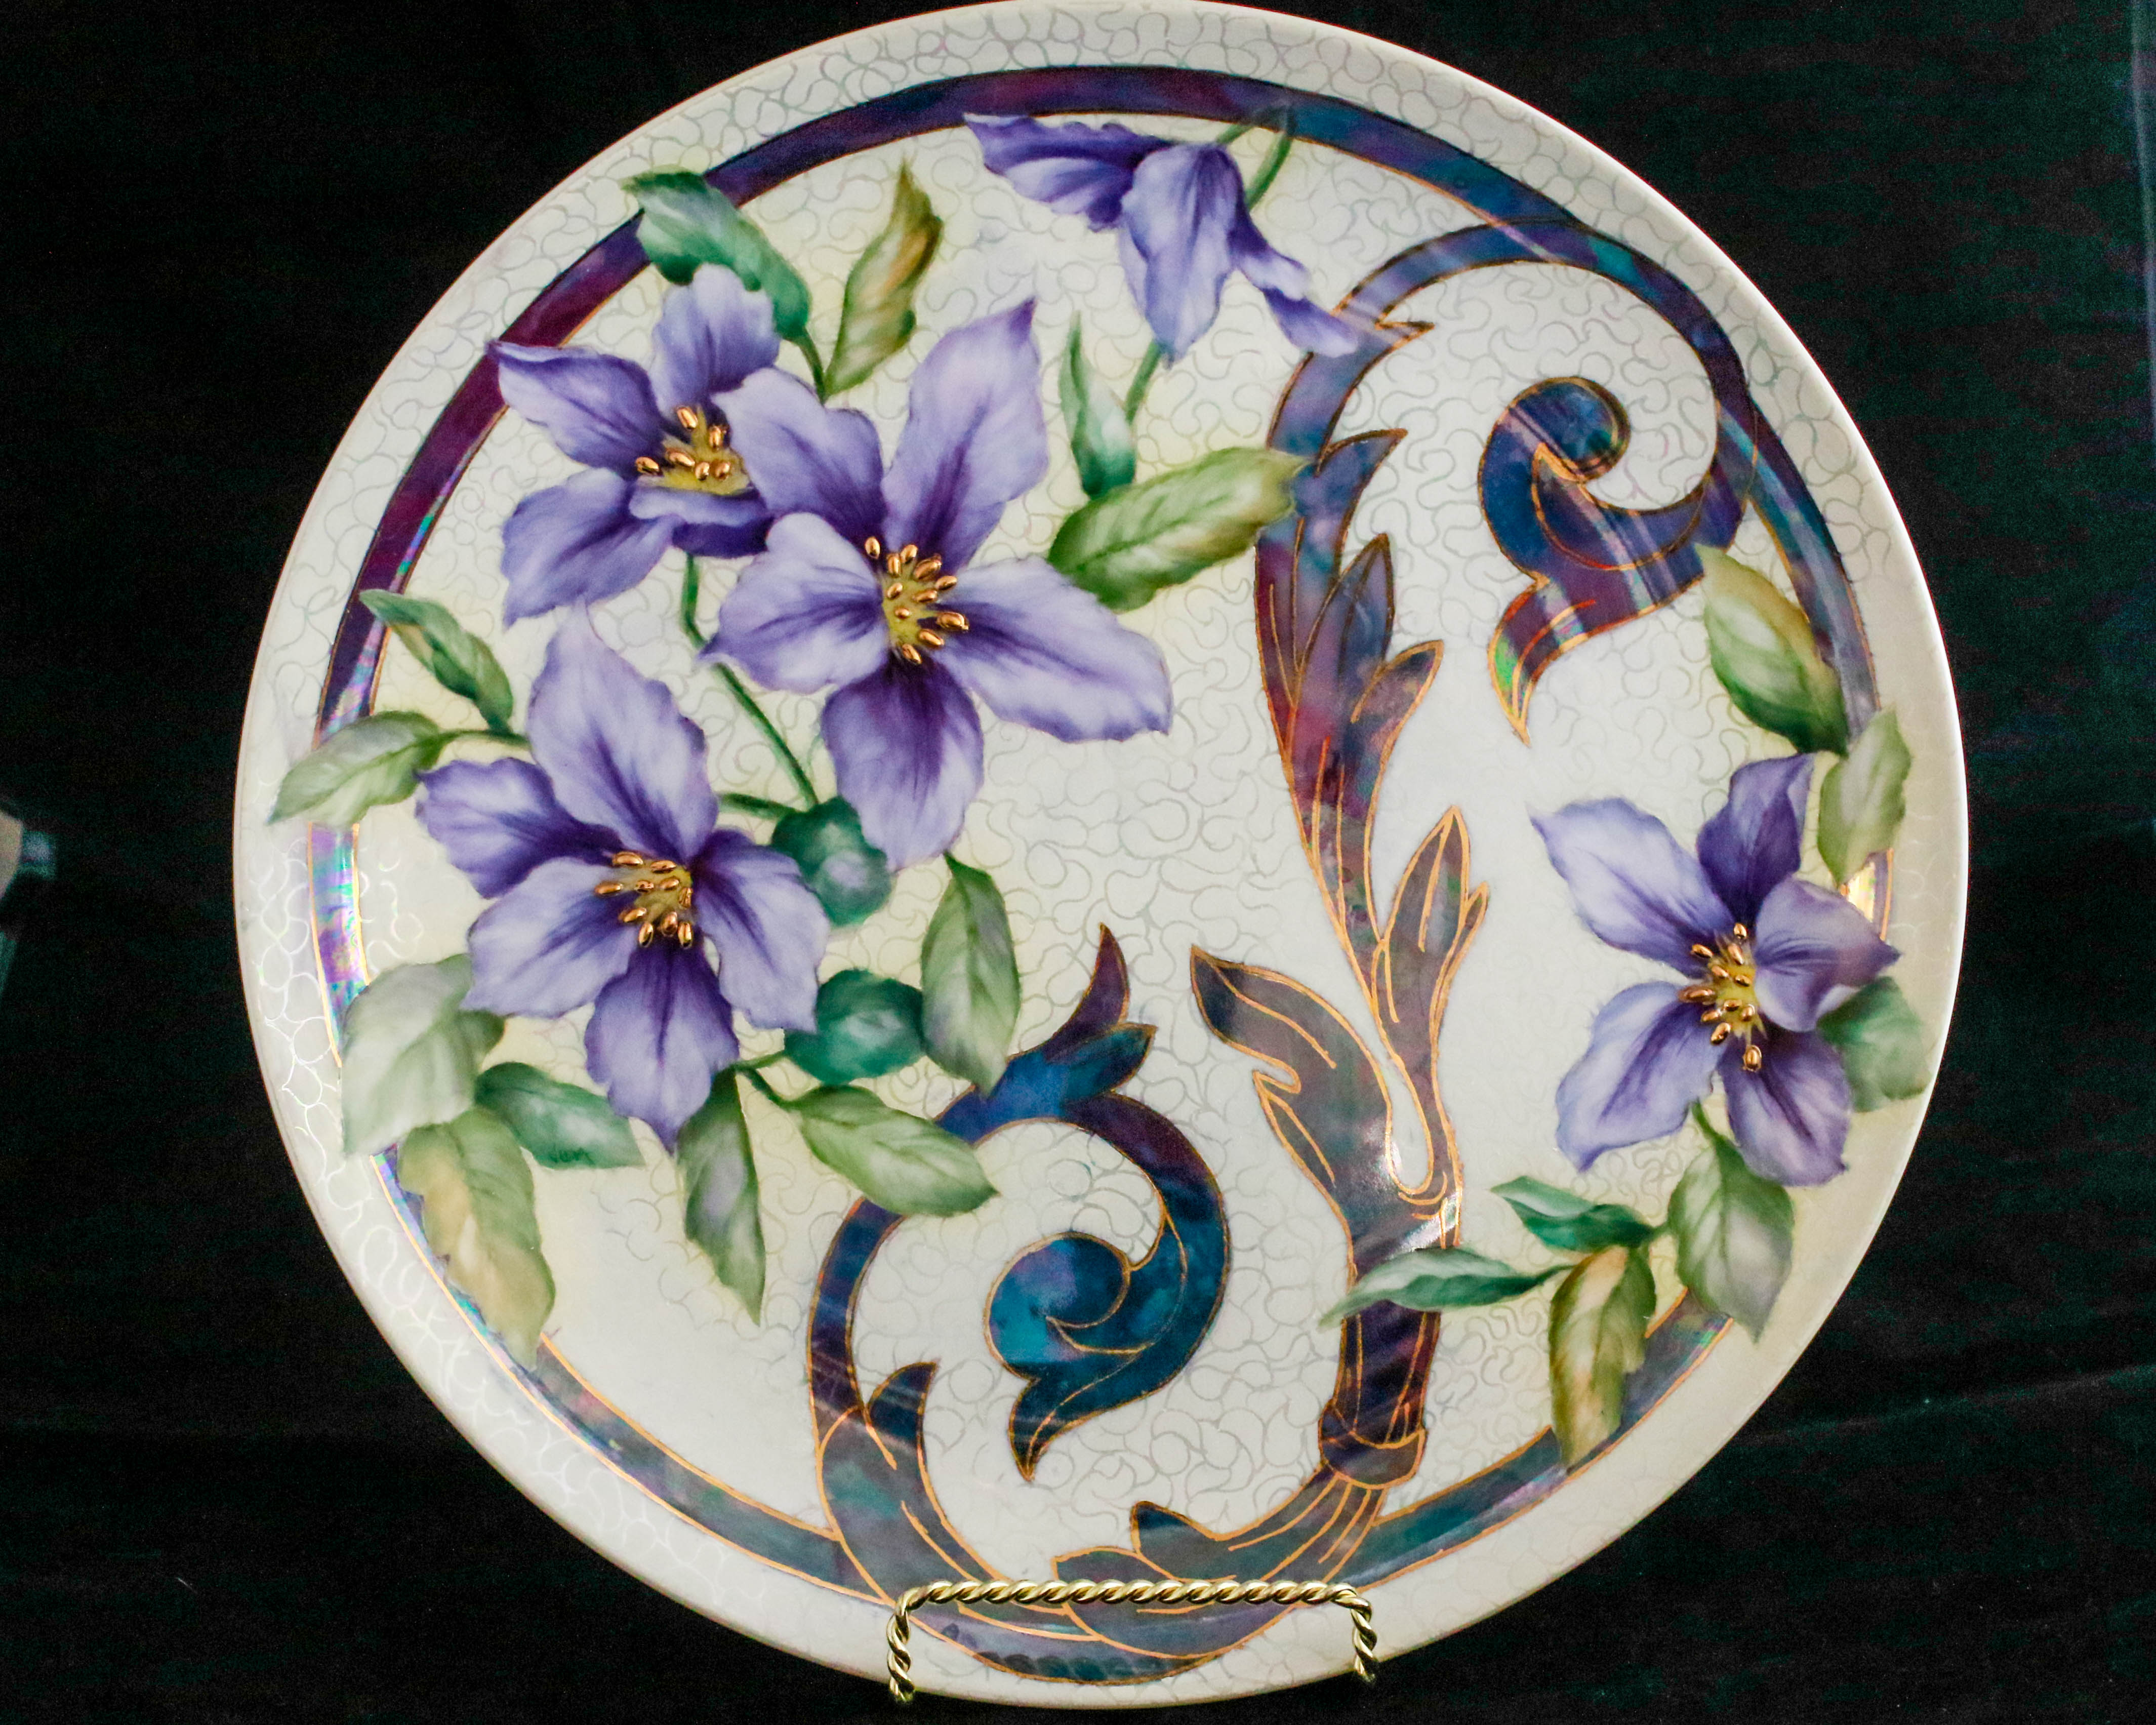 Round porcelain plate, intricately painted with flowers and vines